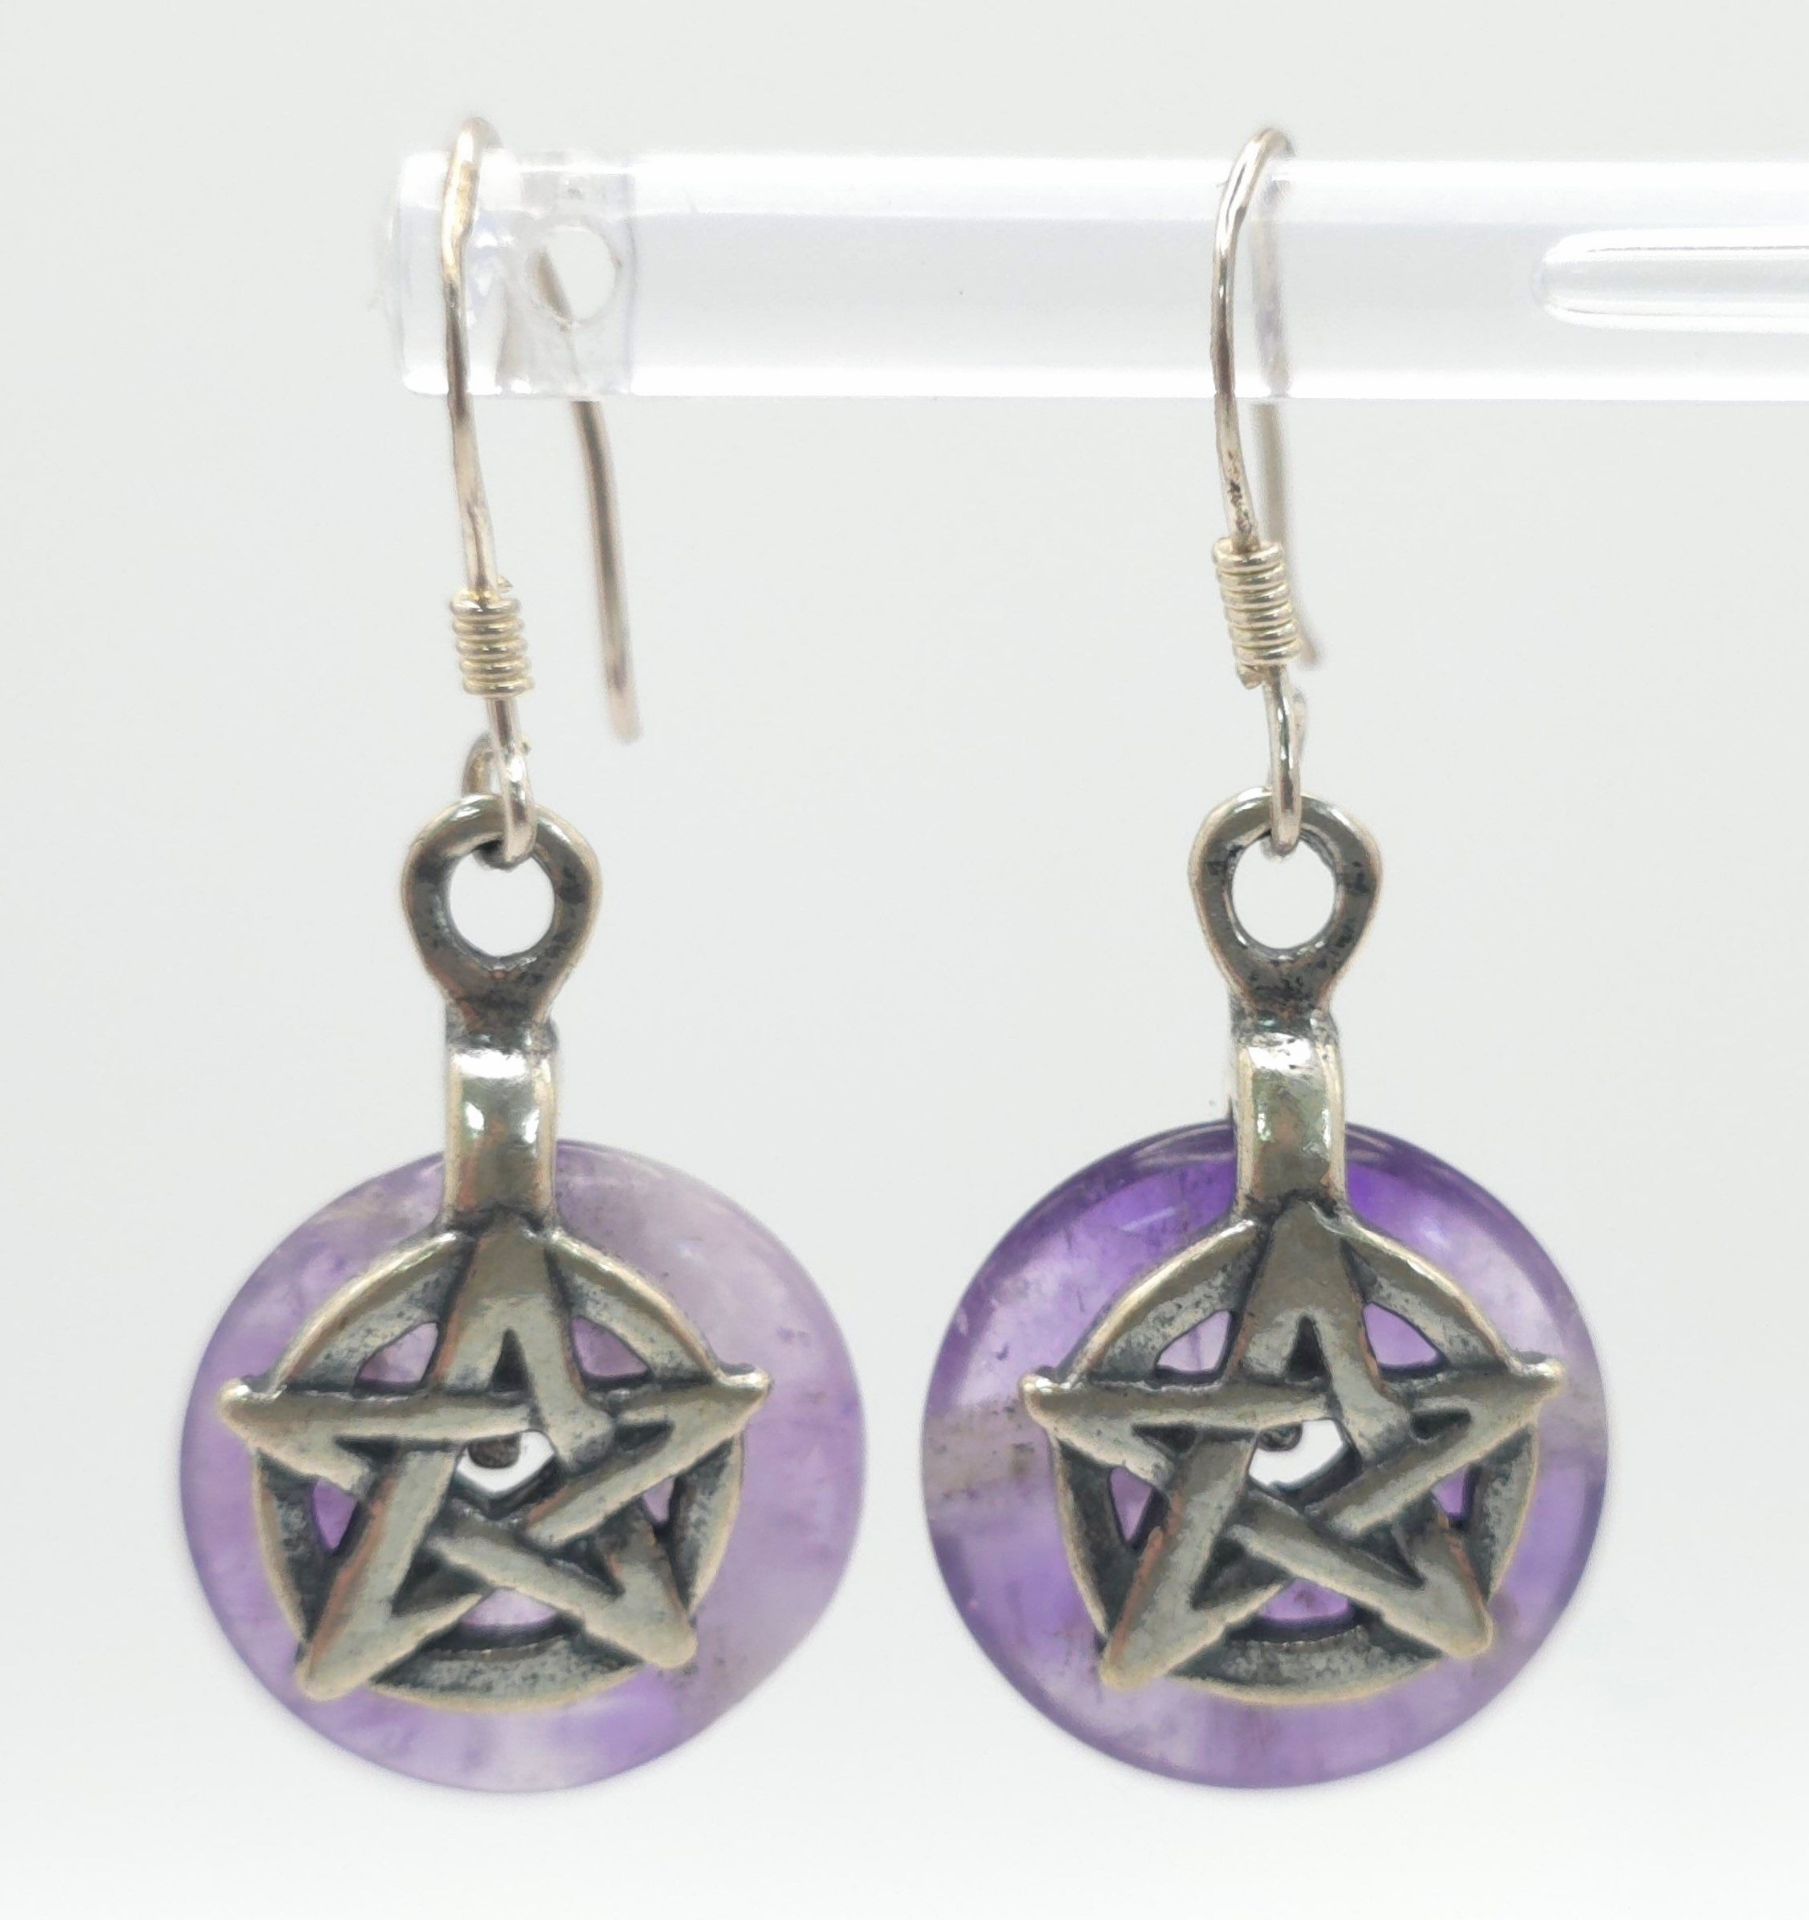 A Pair of Sterling Silver and Amethyst Pentacle Earrings. 3cm Drop. Set with 1.5cm Round Wheel - Image 2 of 5